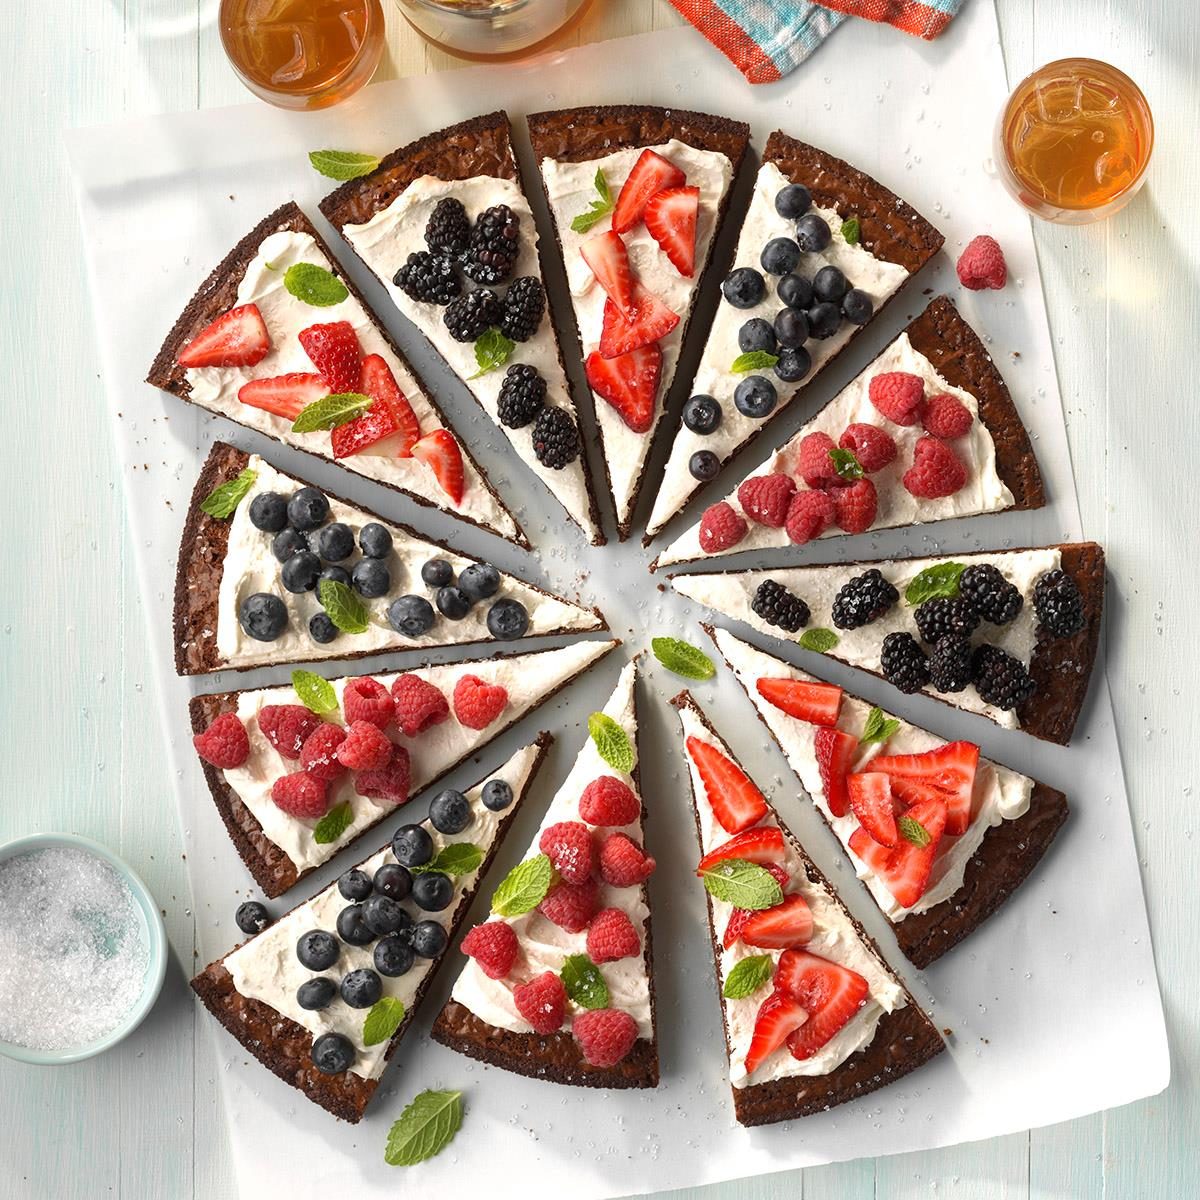 https://www.tasteofhome.com/wp-content/uploads/2018/01/Berry-Patch-Brownie-Pizza_EXPS_HCA18_24511_C05_19_1b-4.jpg?fit=700%2C1024